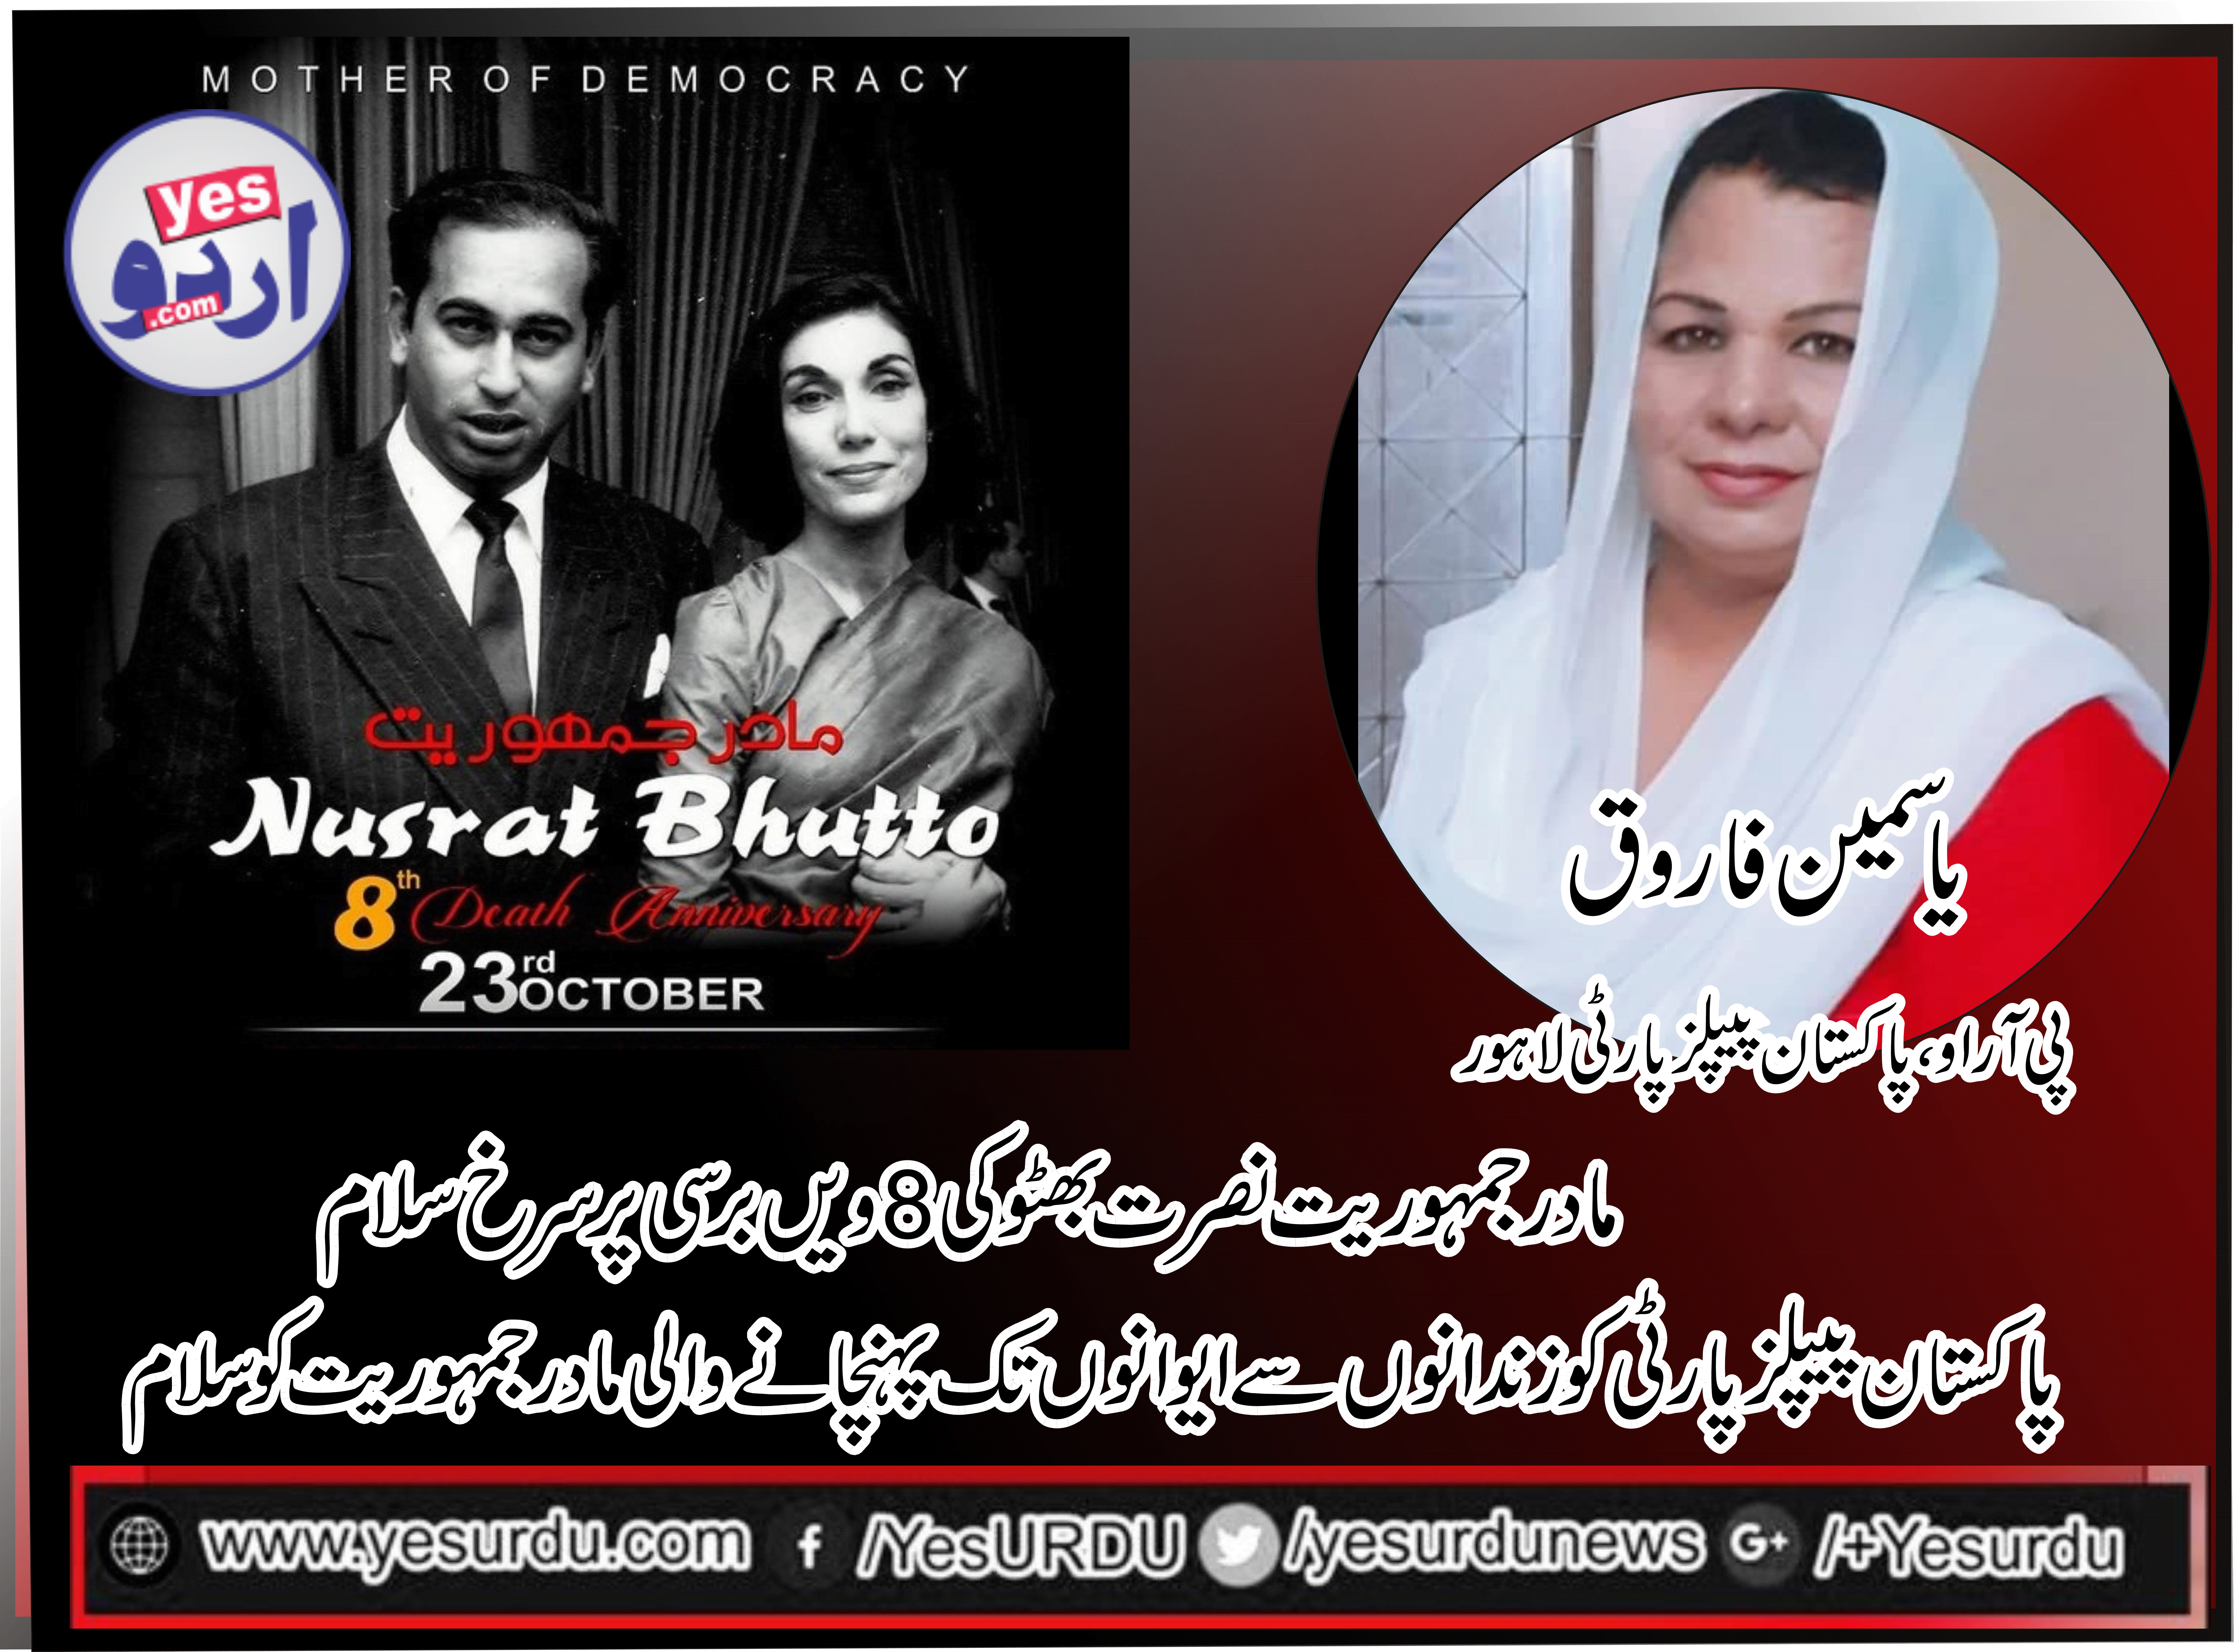 Yasmeen Farooq, PRO, PPP, Lahore, express, his, gratitude, on, 8th, death, anniversary, of, Begum Nusrat Bhutto, Mother, of, Democracy